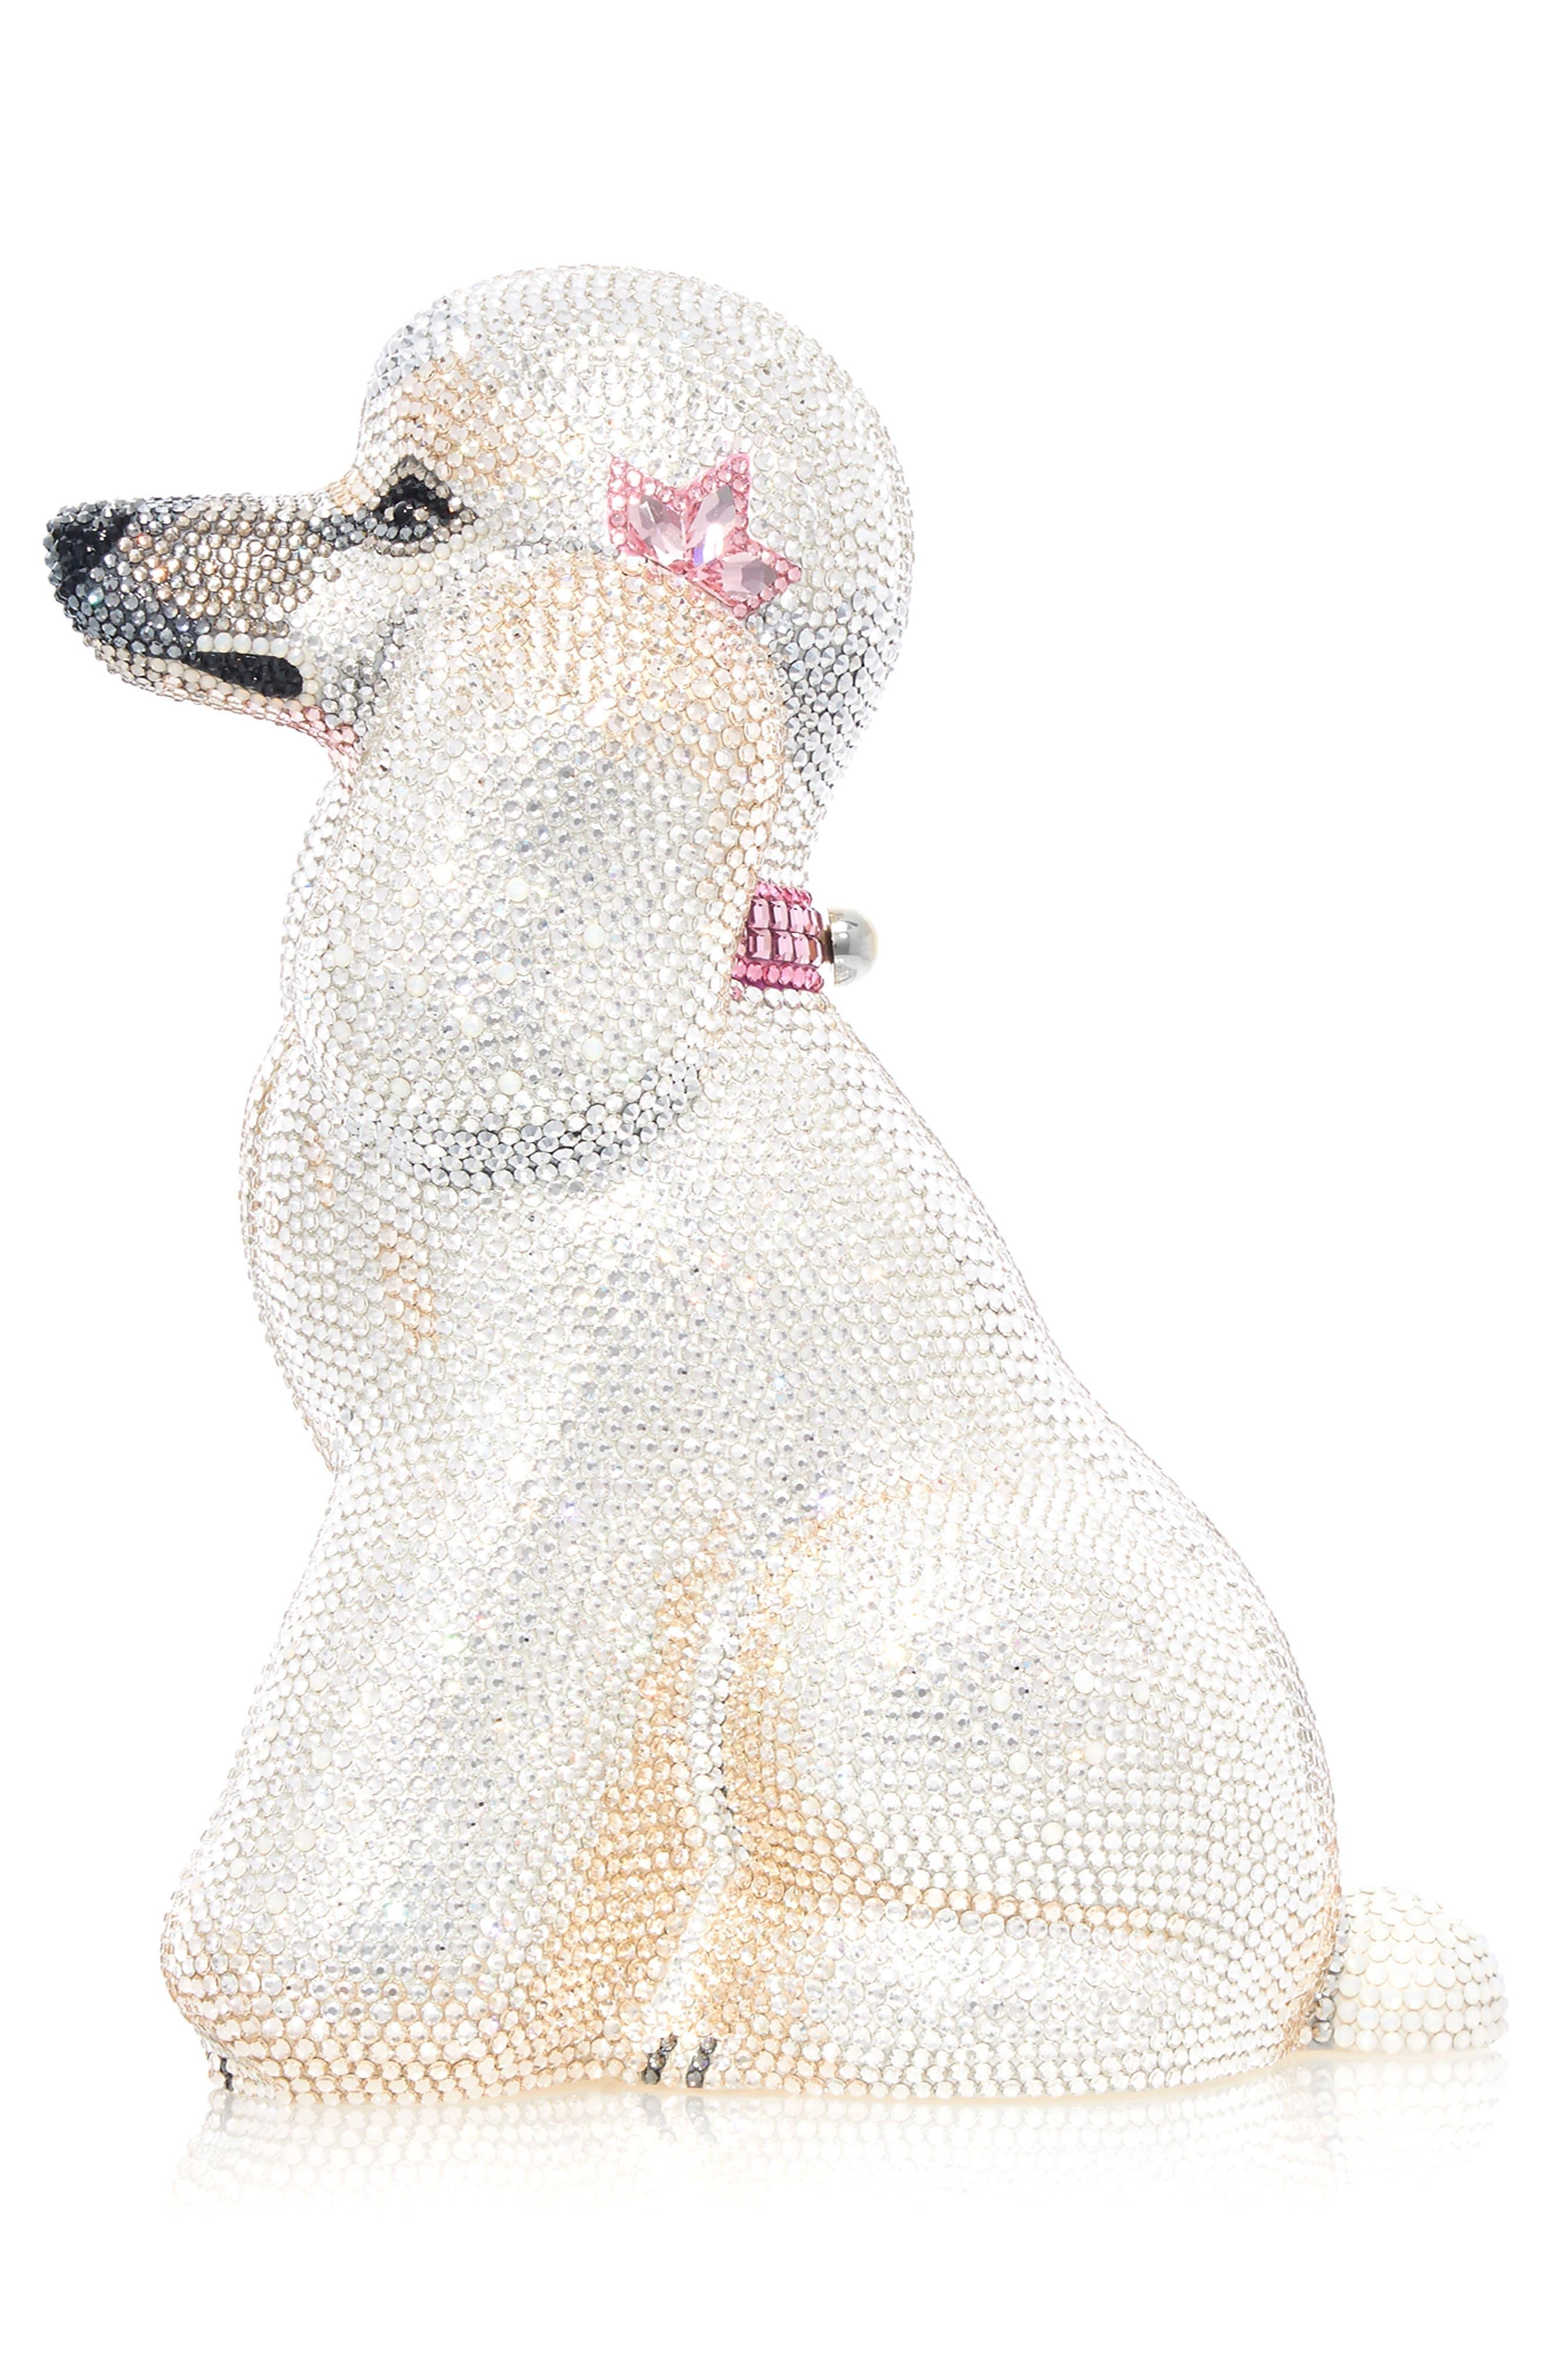 Judith Leiber Judith Leiber French Poodle Lucille Crystal Clutch in White